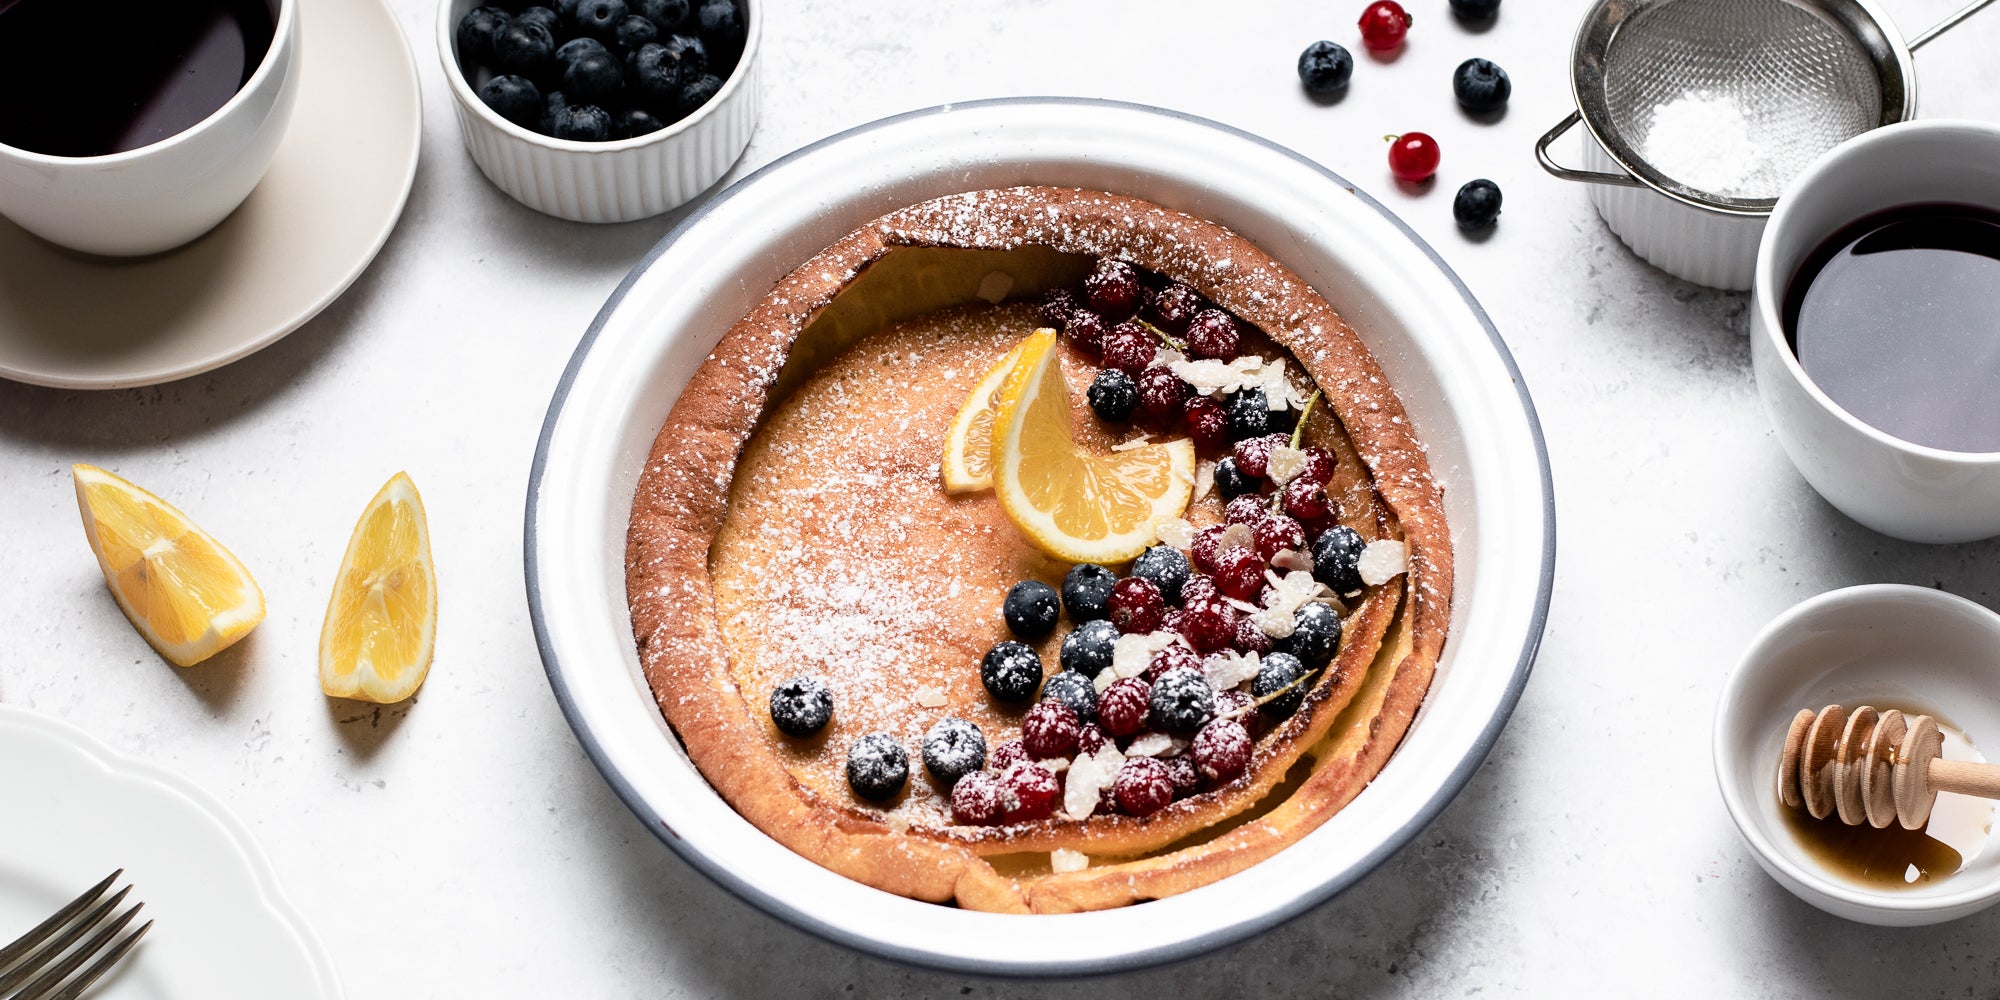 Dutch Baby Pancakes drizzled in honey, topped with berries and lemon, next to cups of coffee, a honey drizzler and ramekin of blueberries